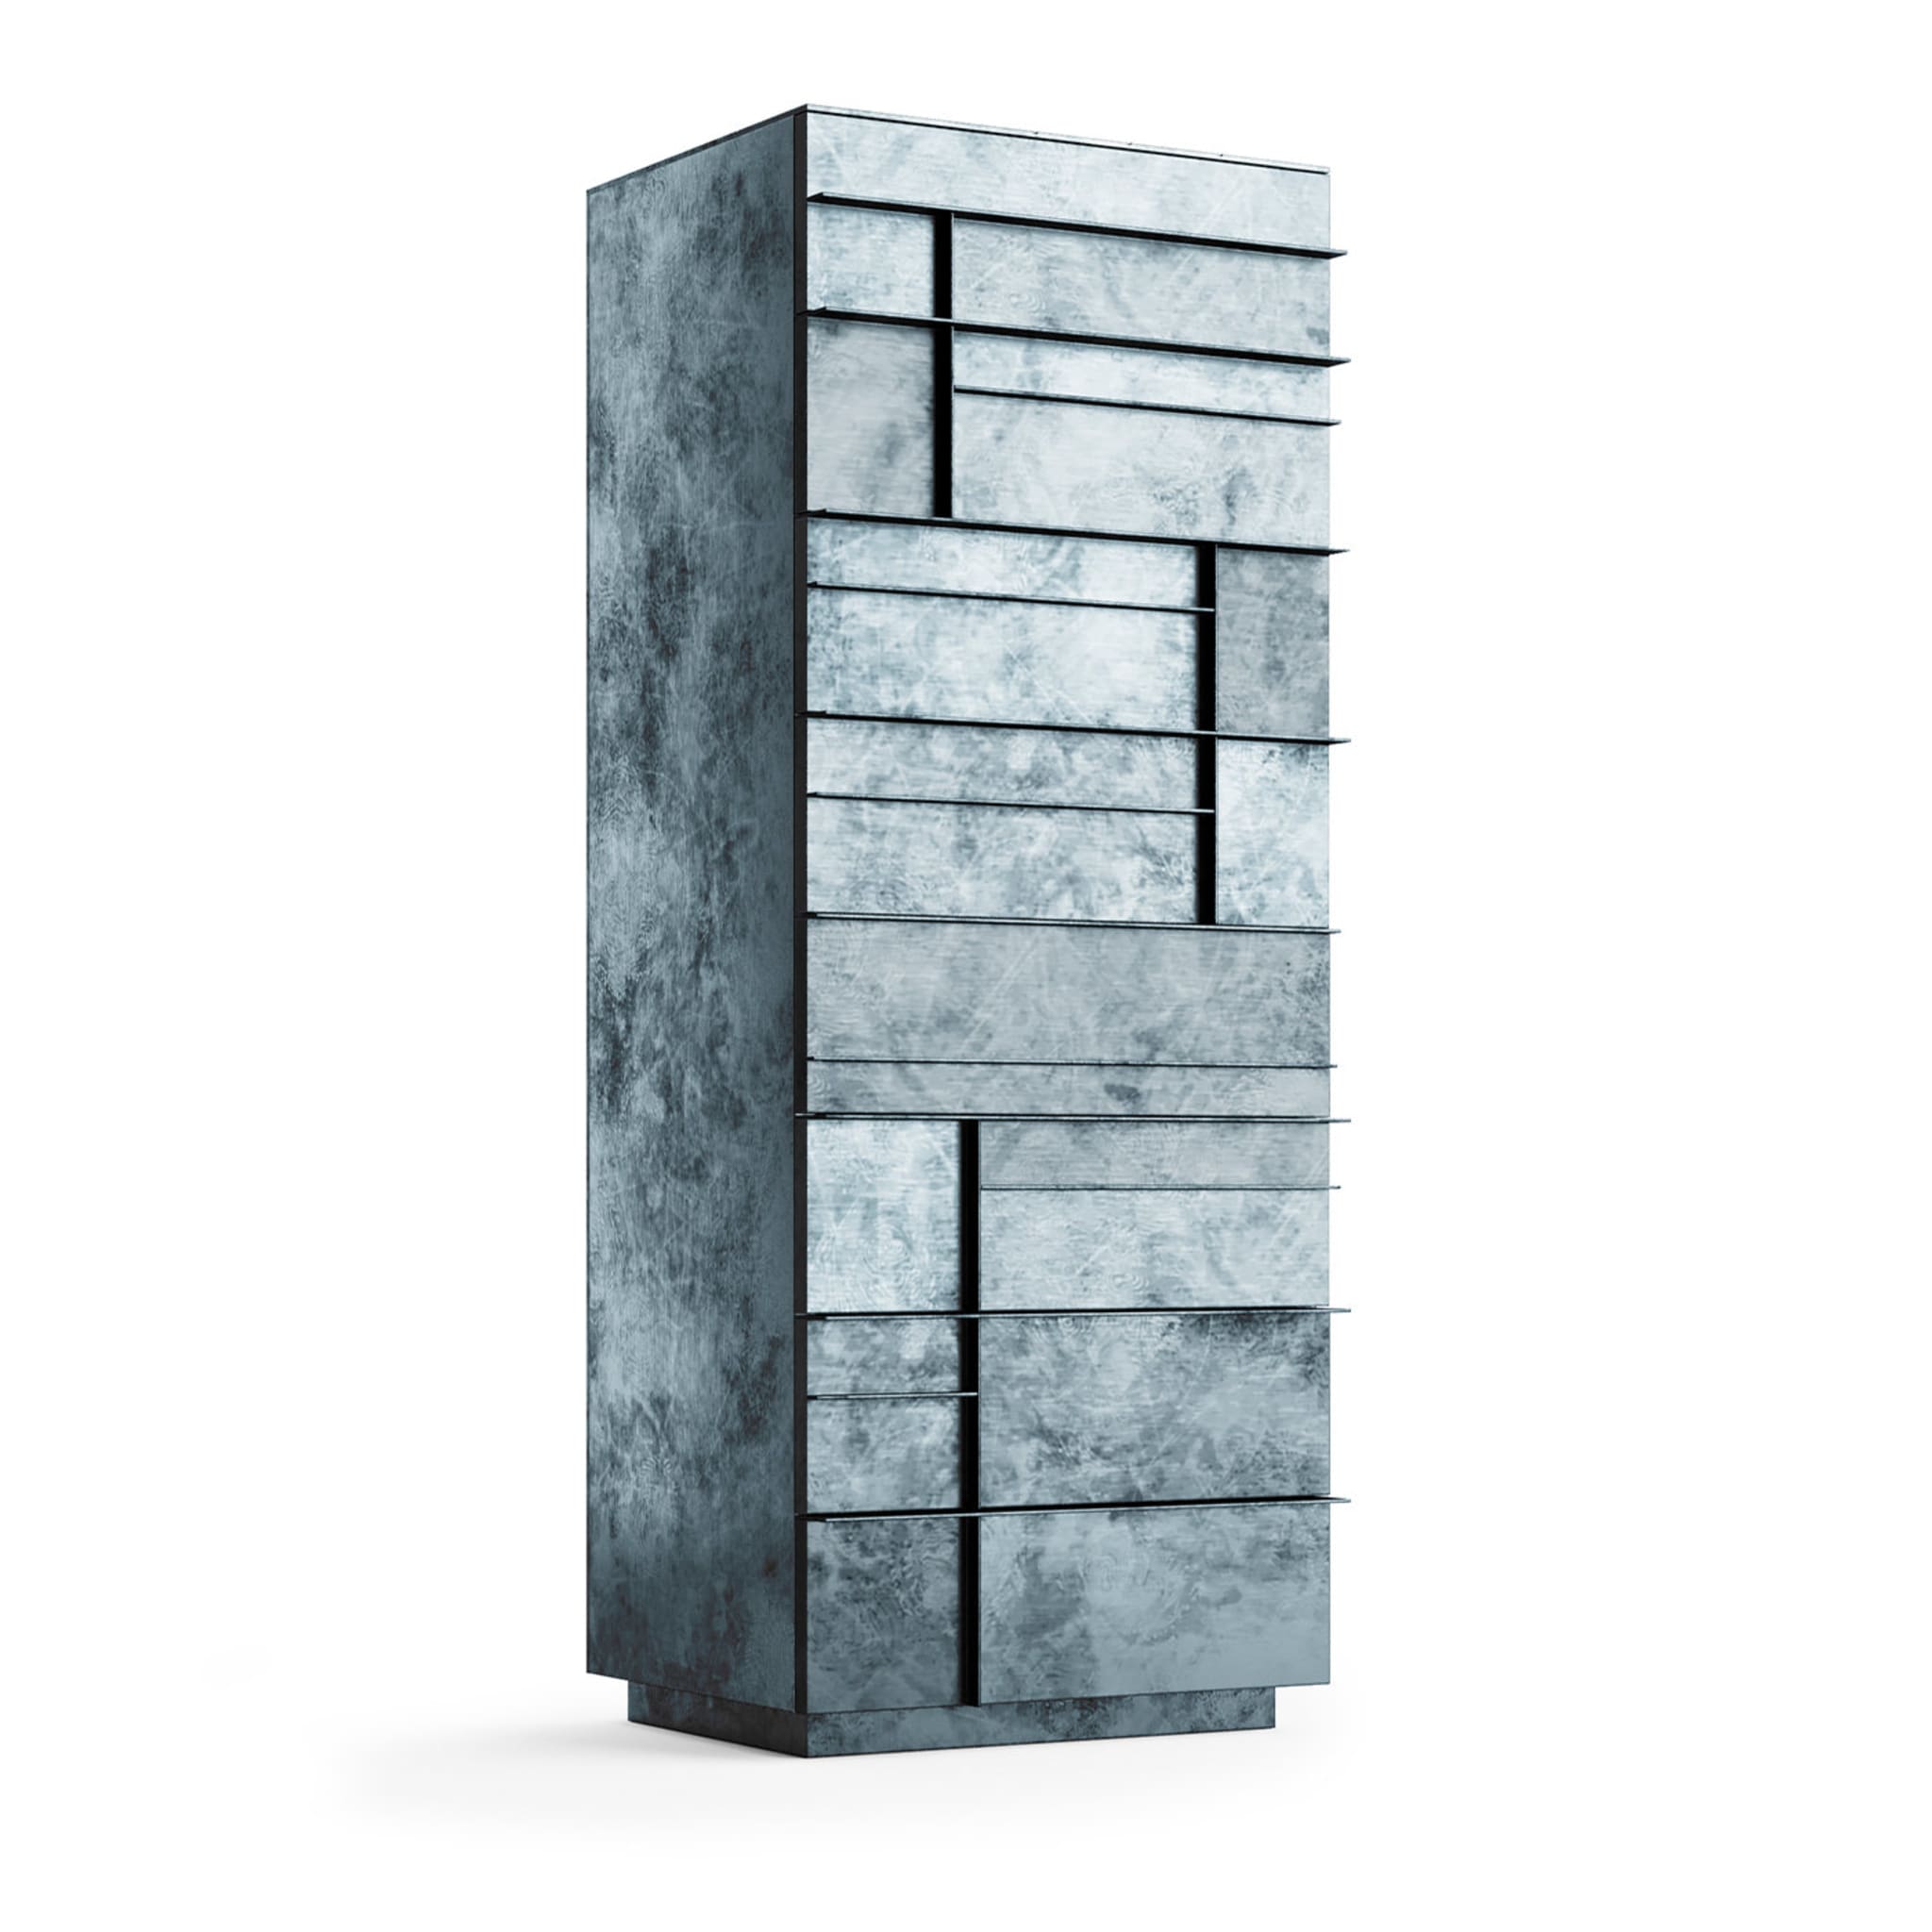 Tracce Layer Chest of Drawers by Giuseppe Maurizio Scutellà  - Alternative view 1